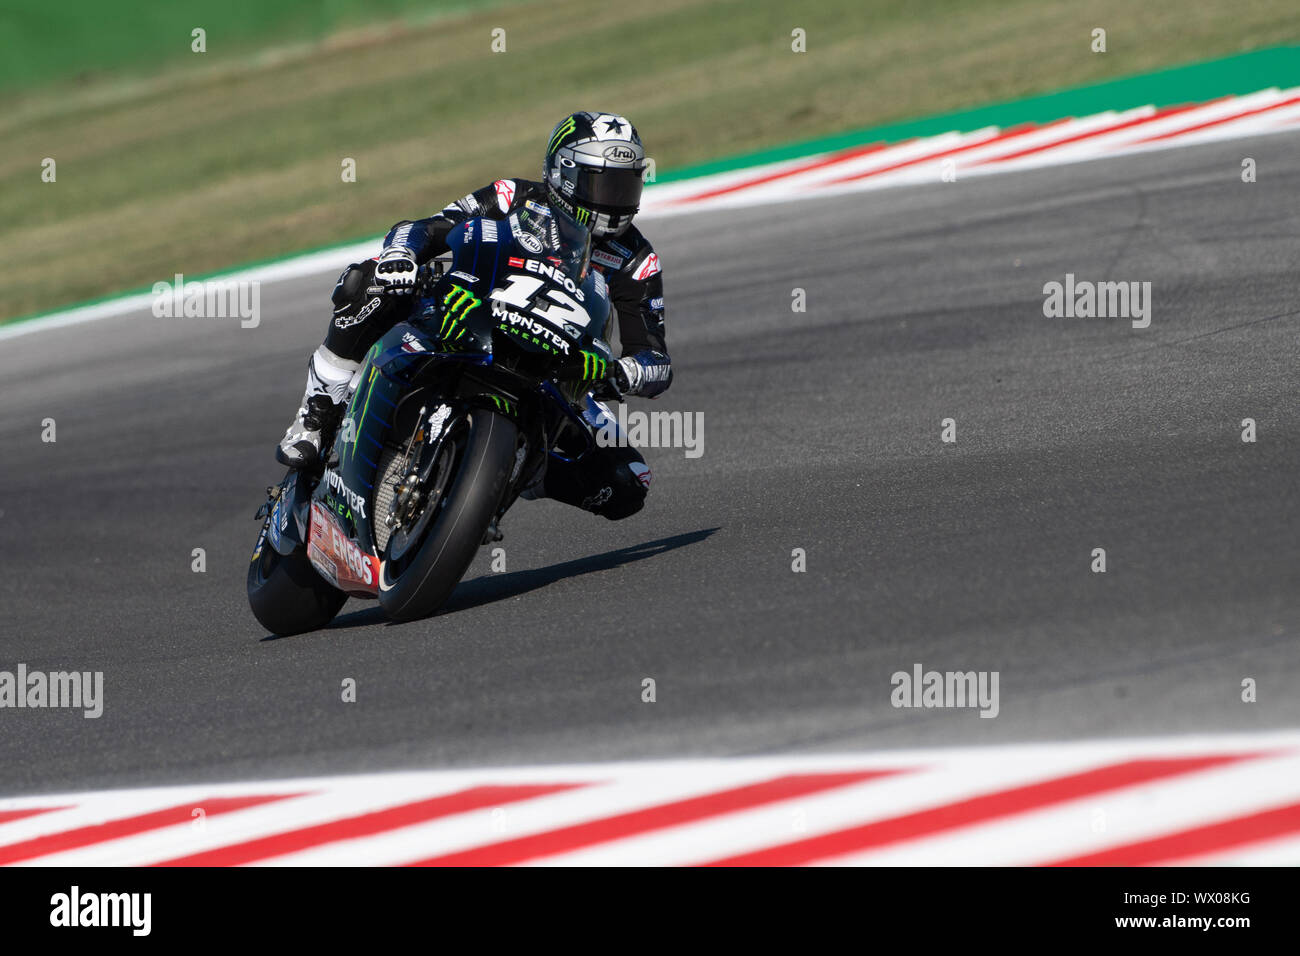 MAVERICK VINALES, SPANISH RIDER NUMBER 12 FOR YAMAHA MONSTER TEAM IN MOTOGP  during Friday Free Practice (fp1-fp2) Of The Motogp Of San Marino And Riv Stock Photo